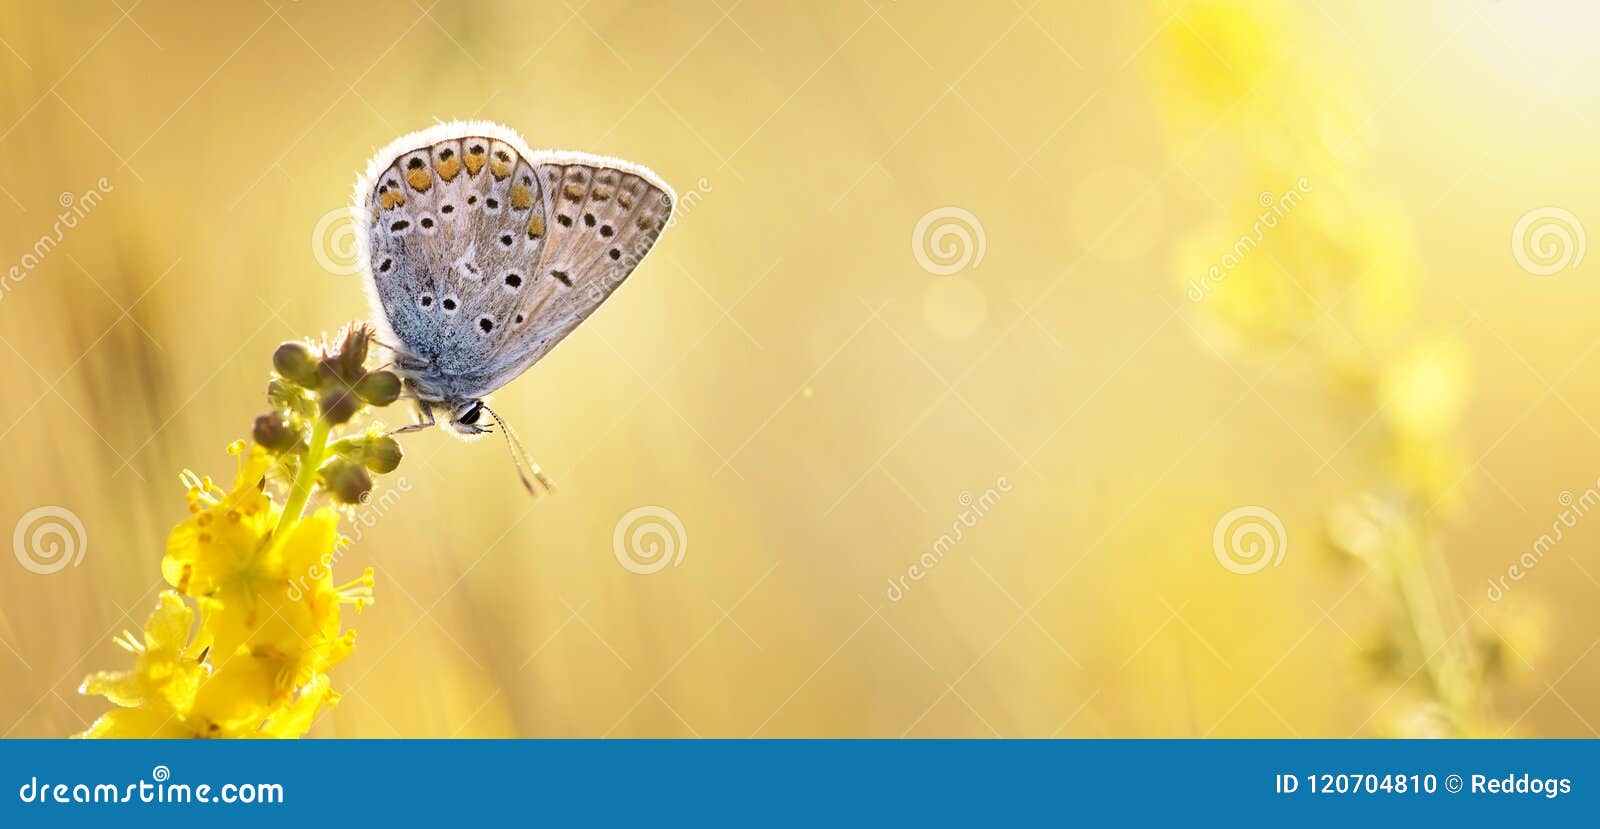 summer, summertime background - butterfly sitting on a yellow fl